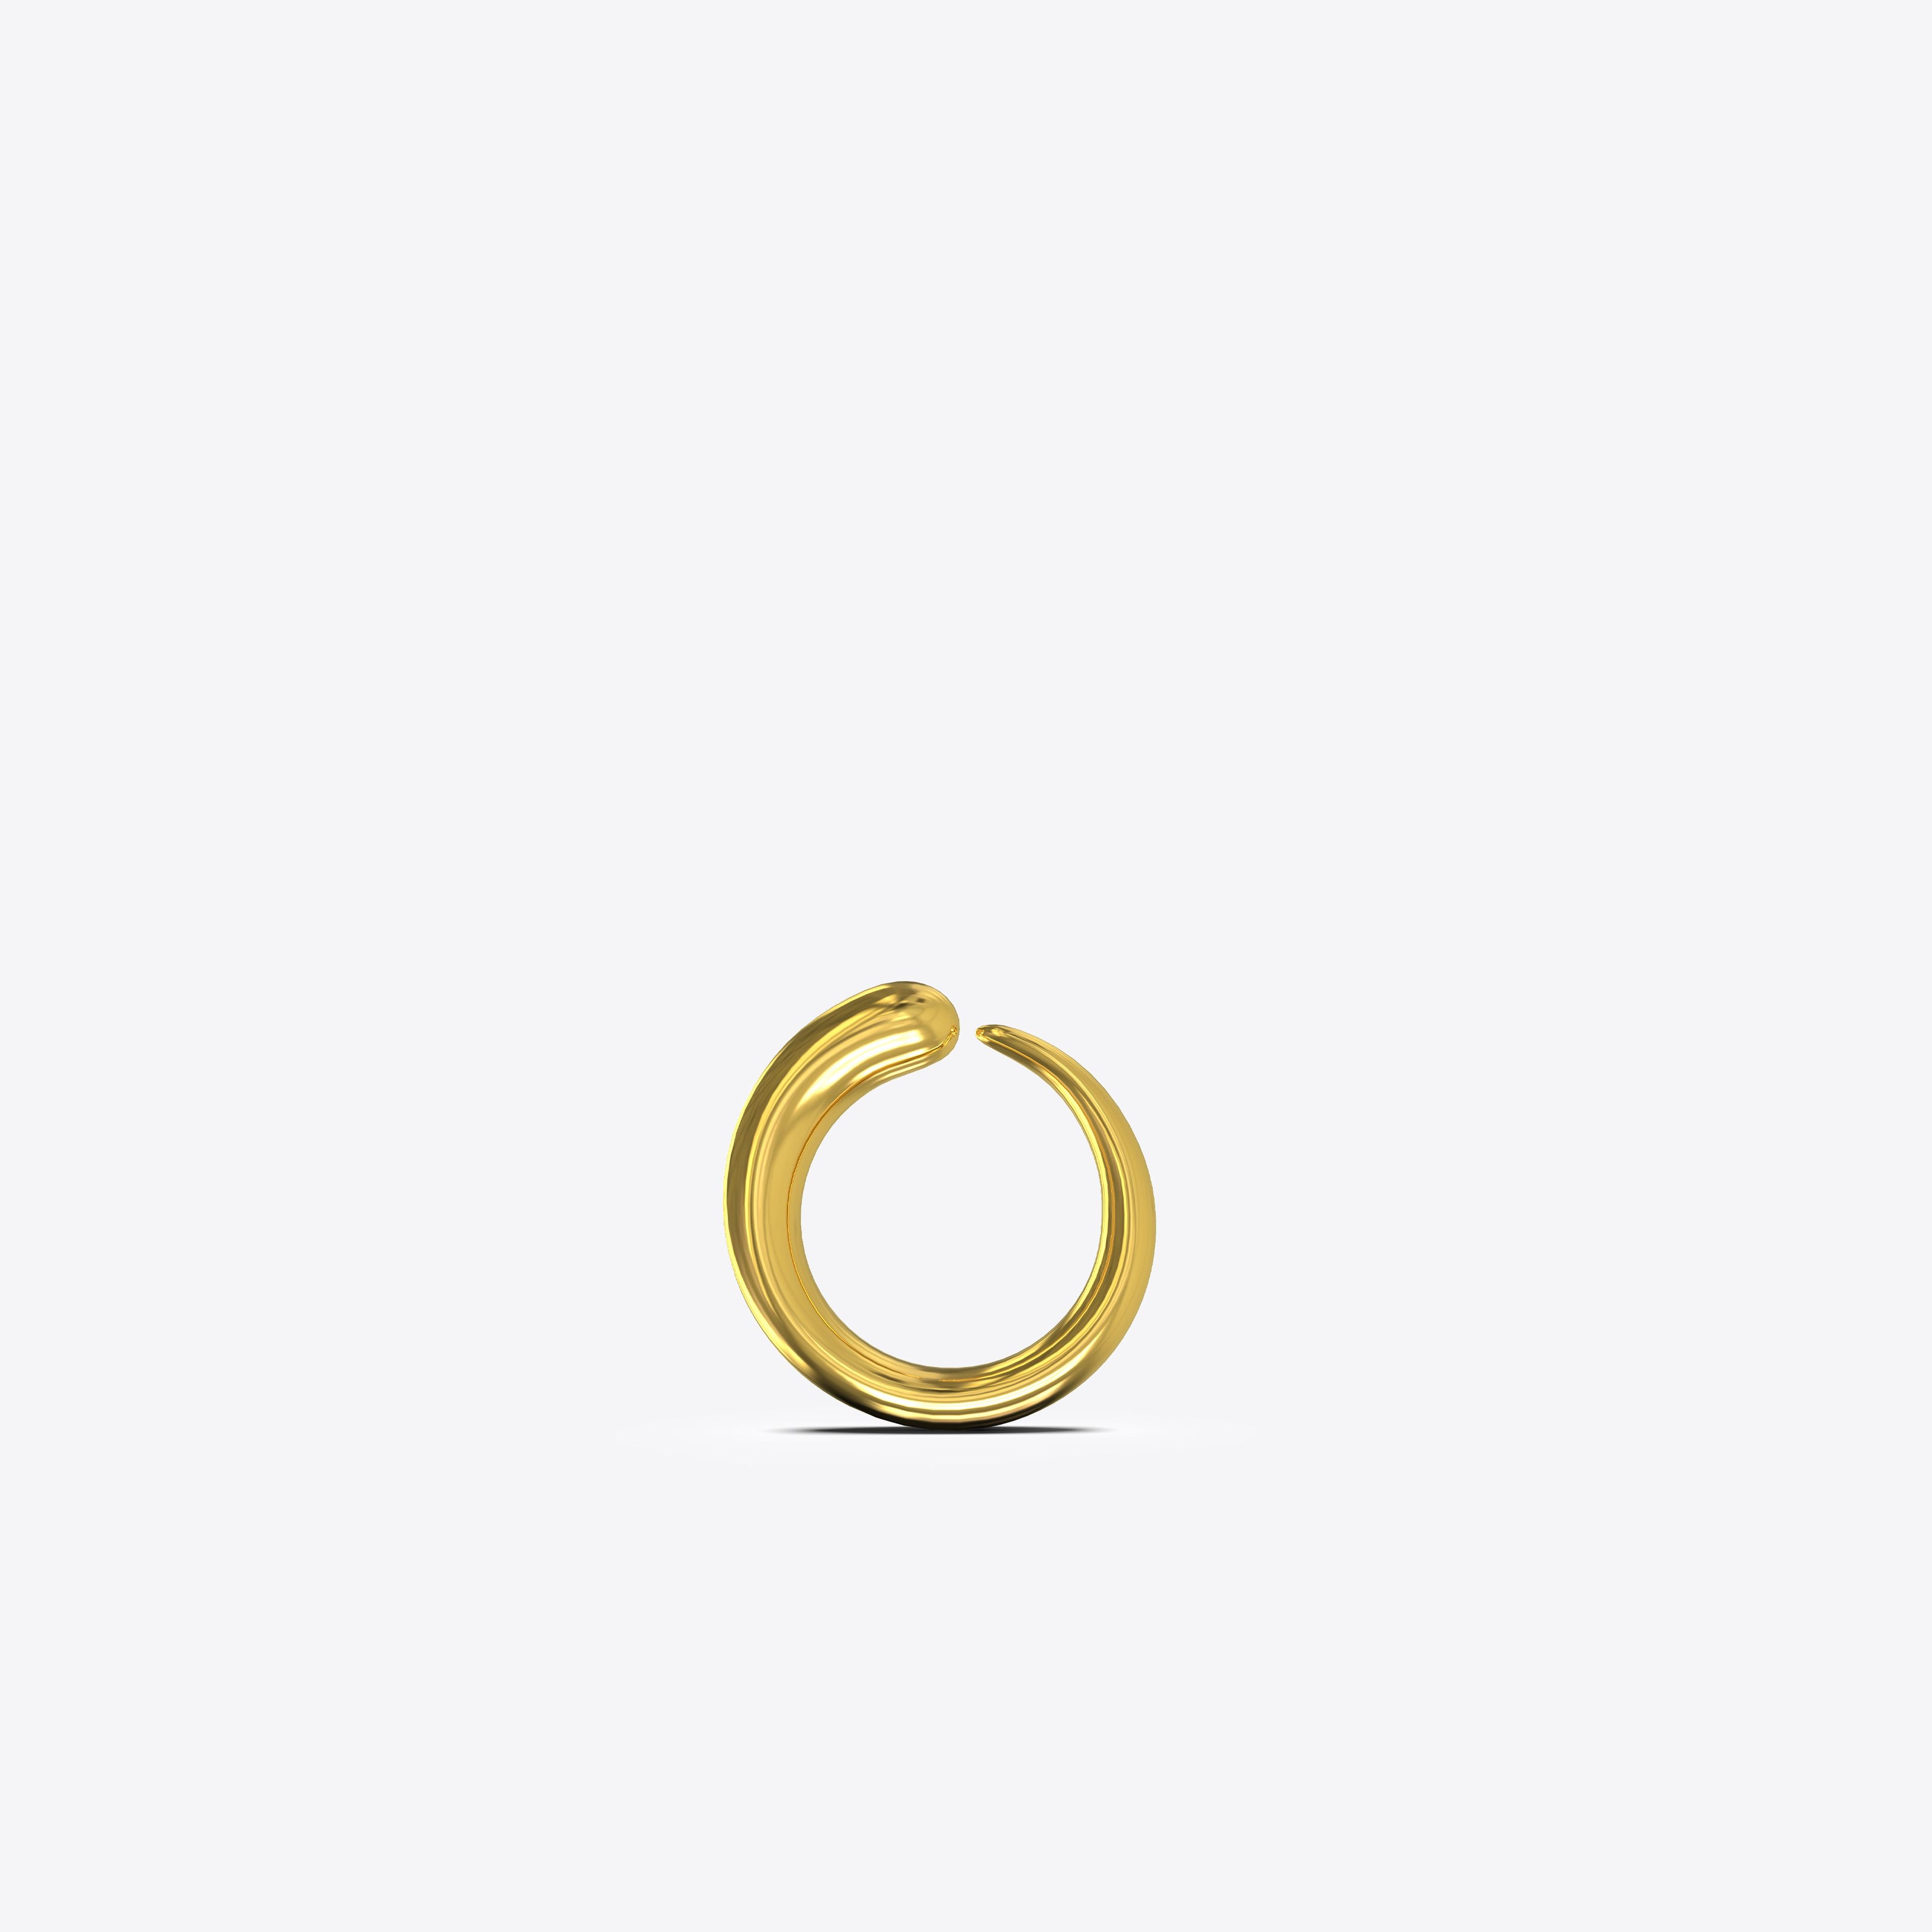 Khartoum Stacking Ring Nude in Polished Gold Vermeil